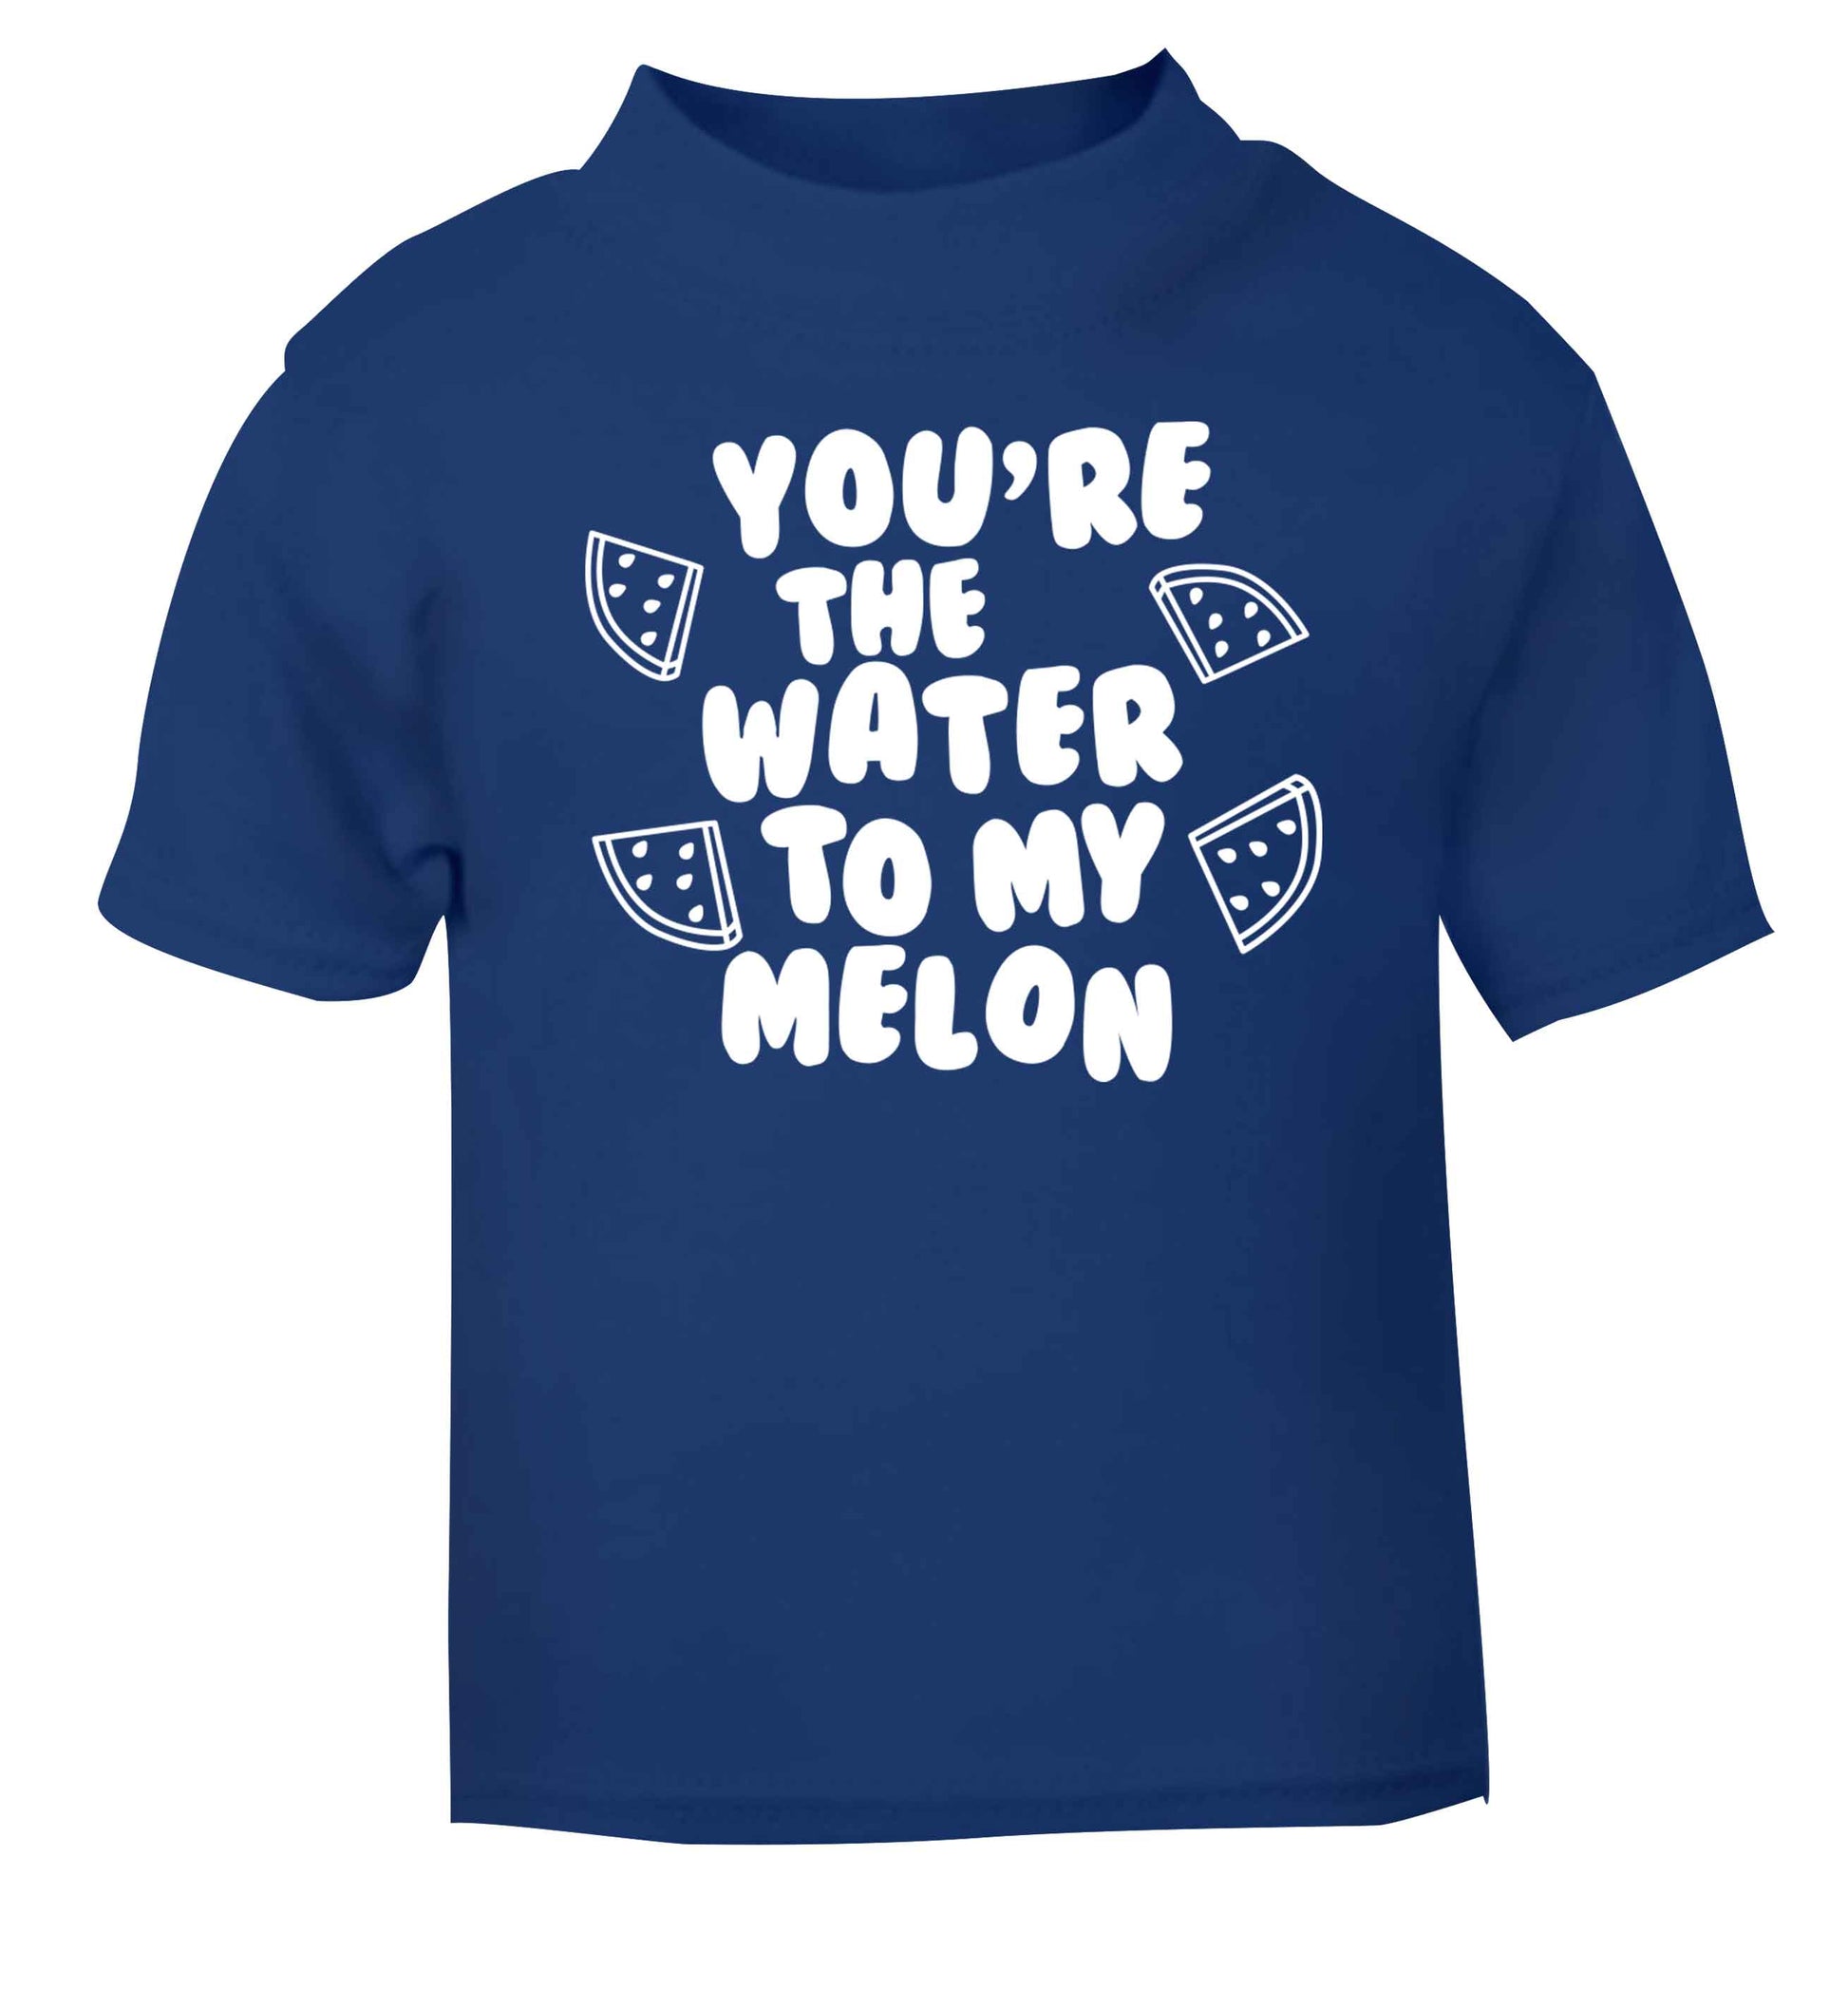 You're the water to my melon blue baby toddler Tshirt 2 Years